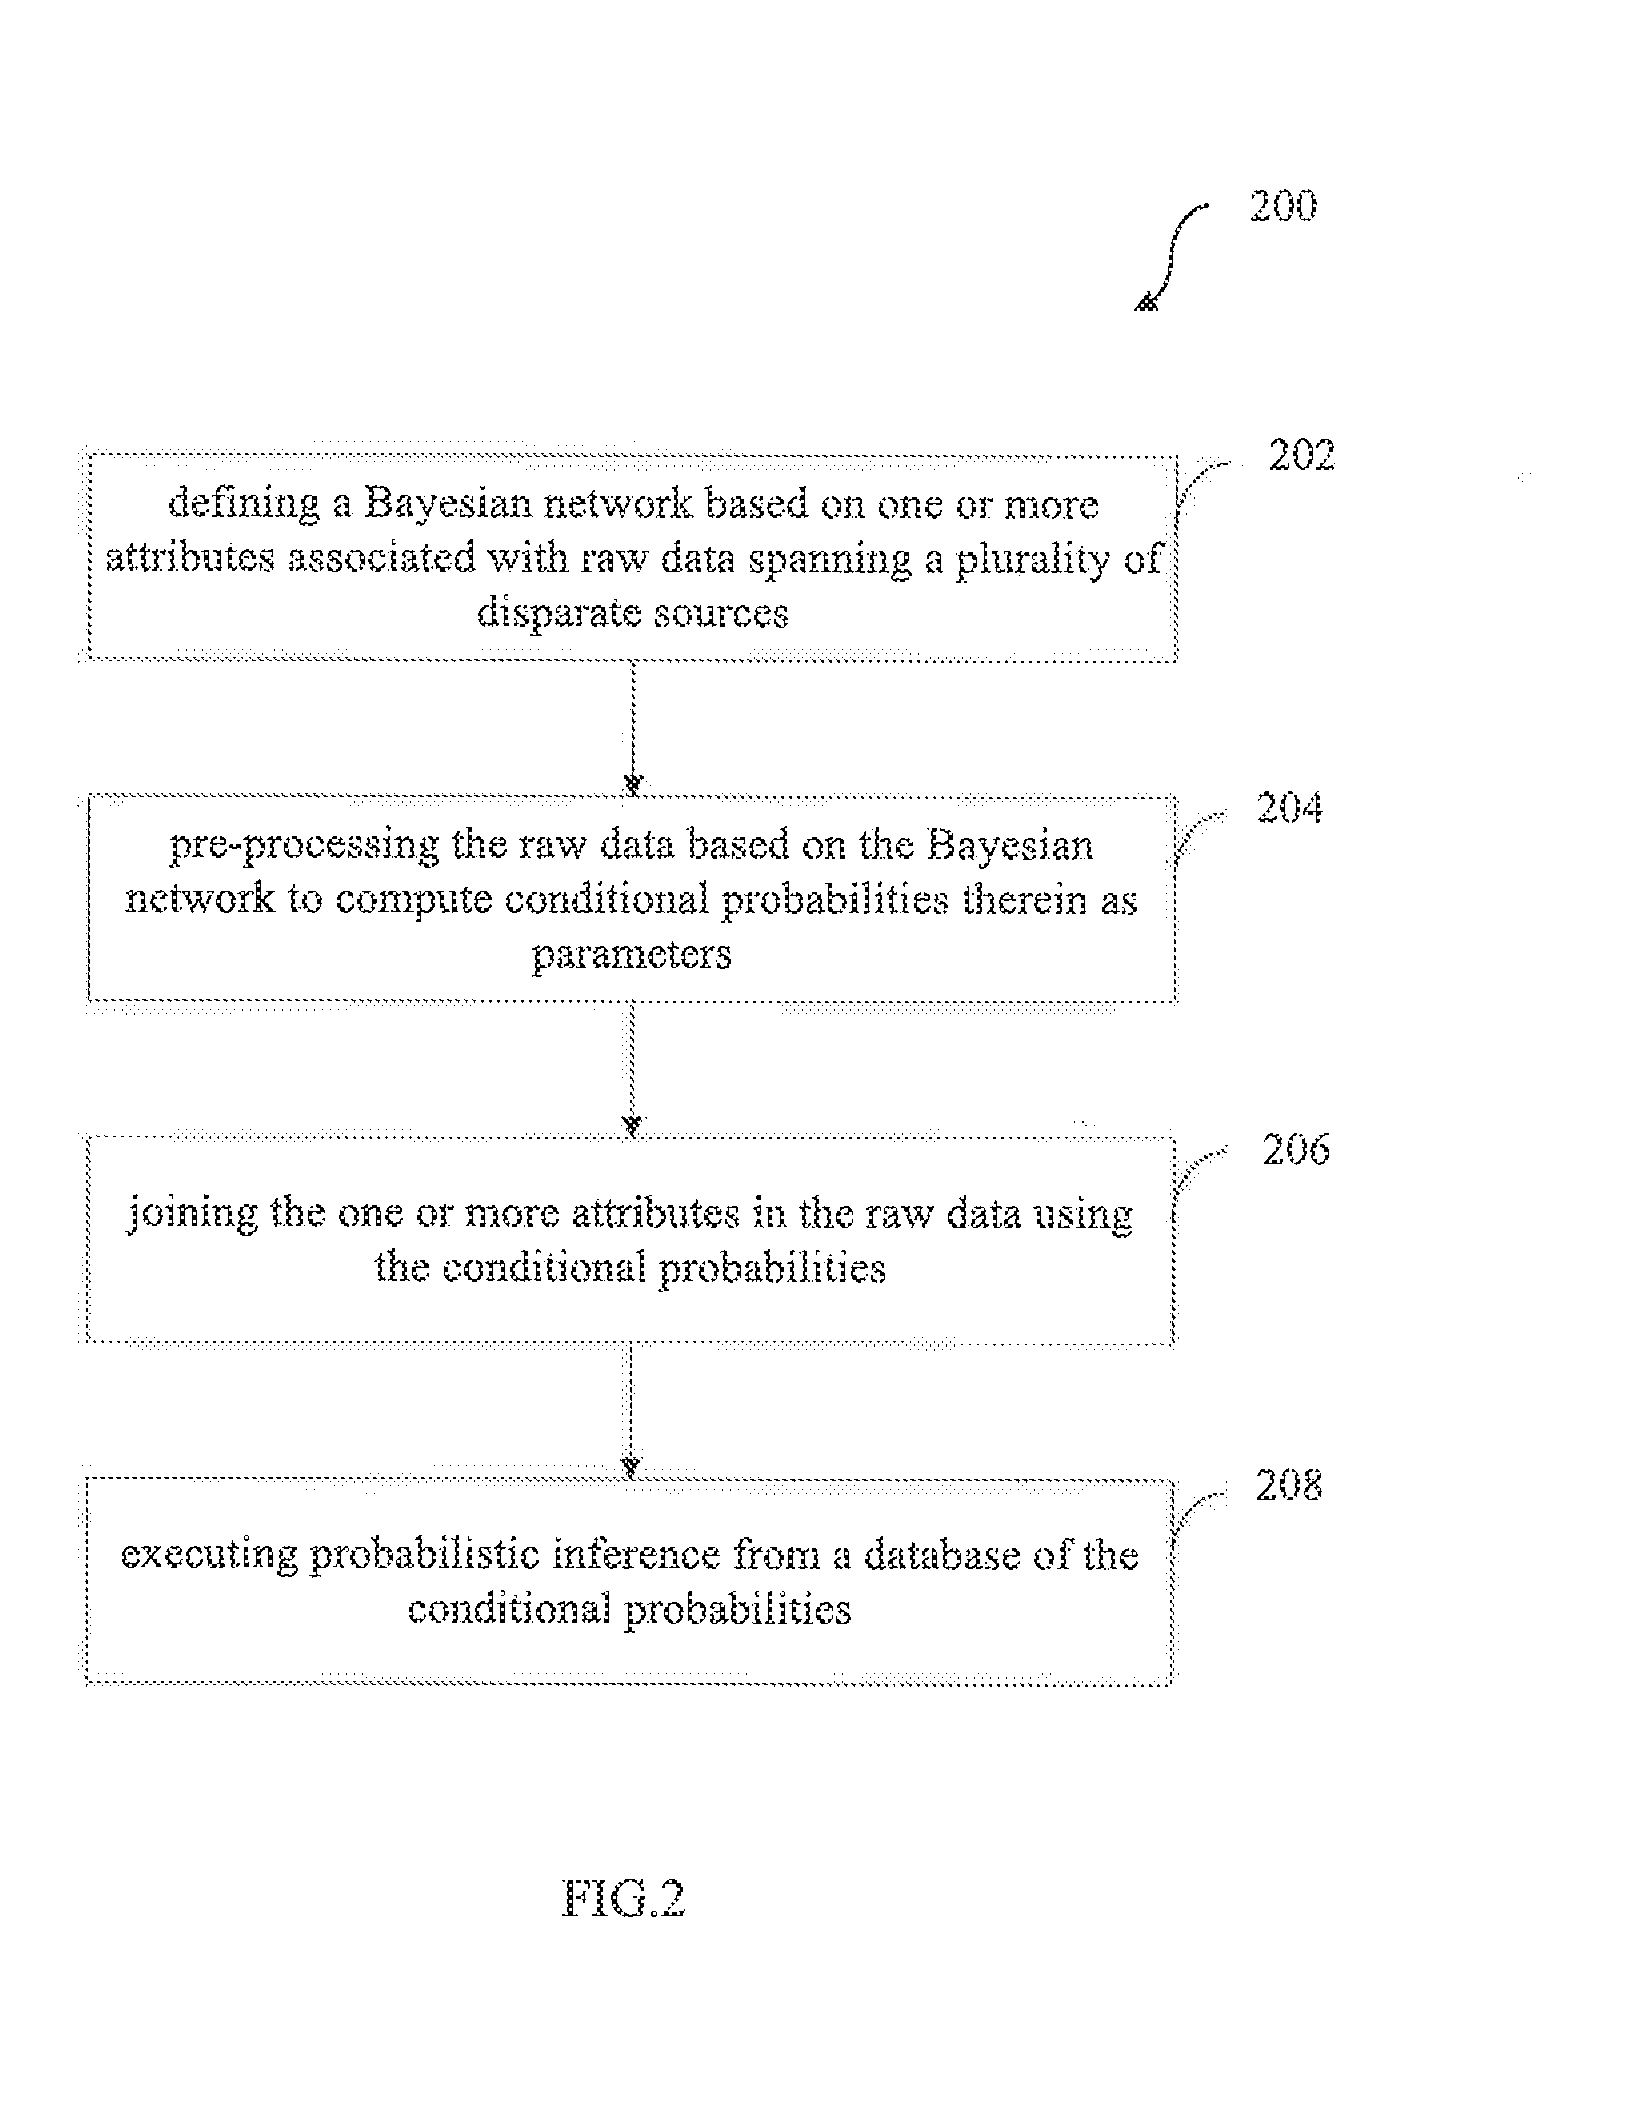 Method and system for fusing business data for distributional queries